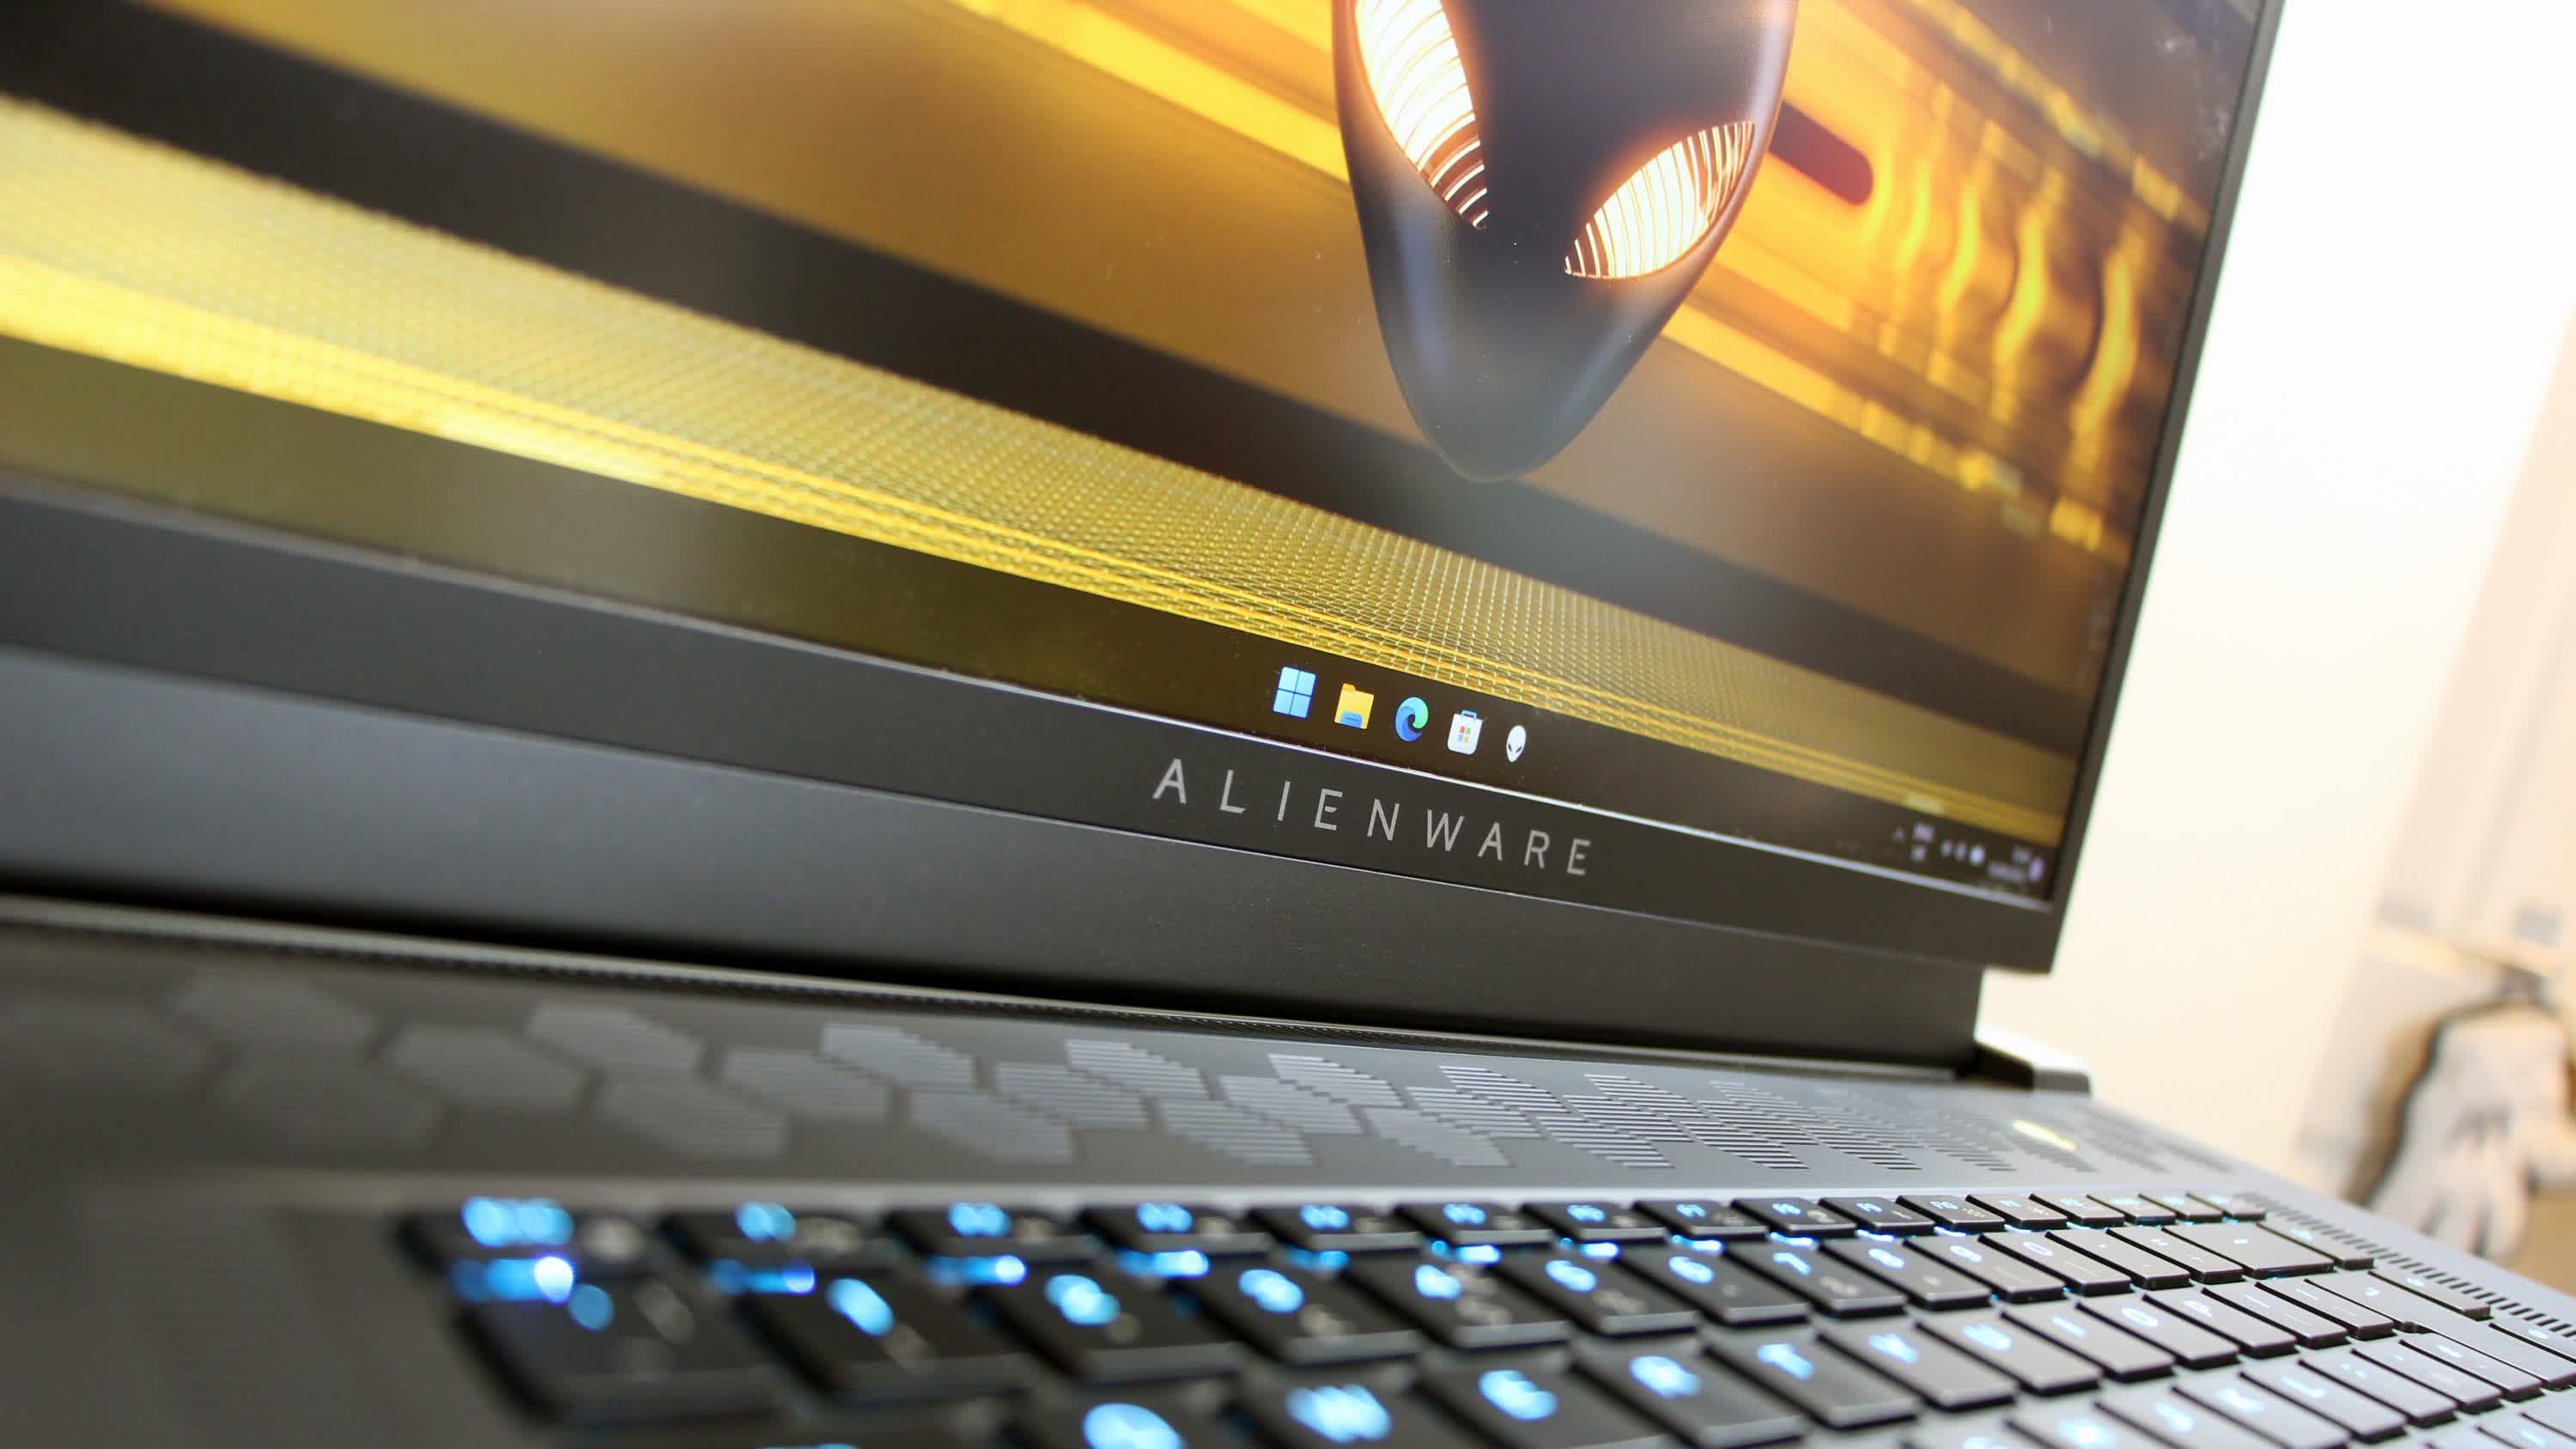 Alienware x17 R2 Gaming Laptop Review